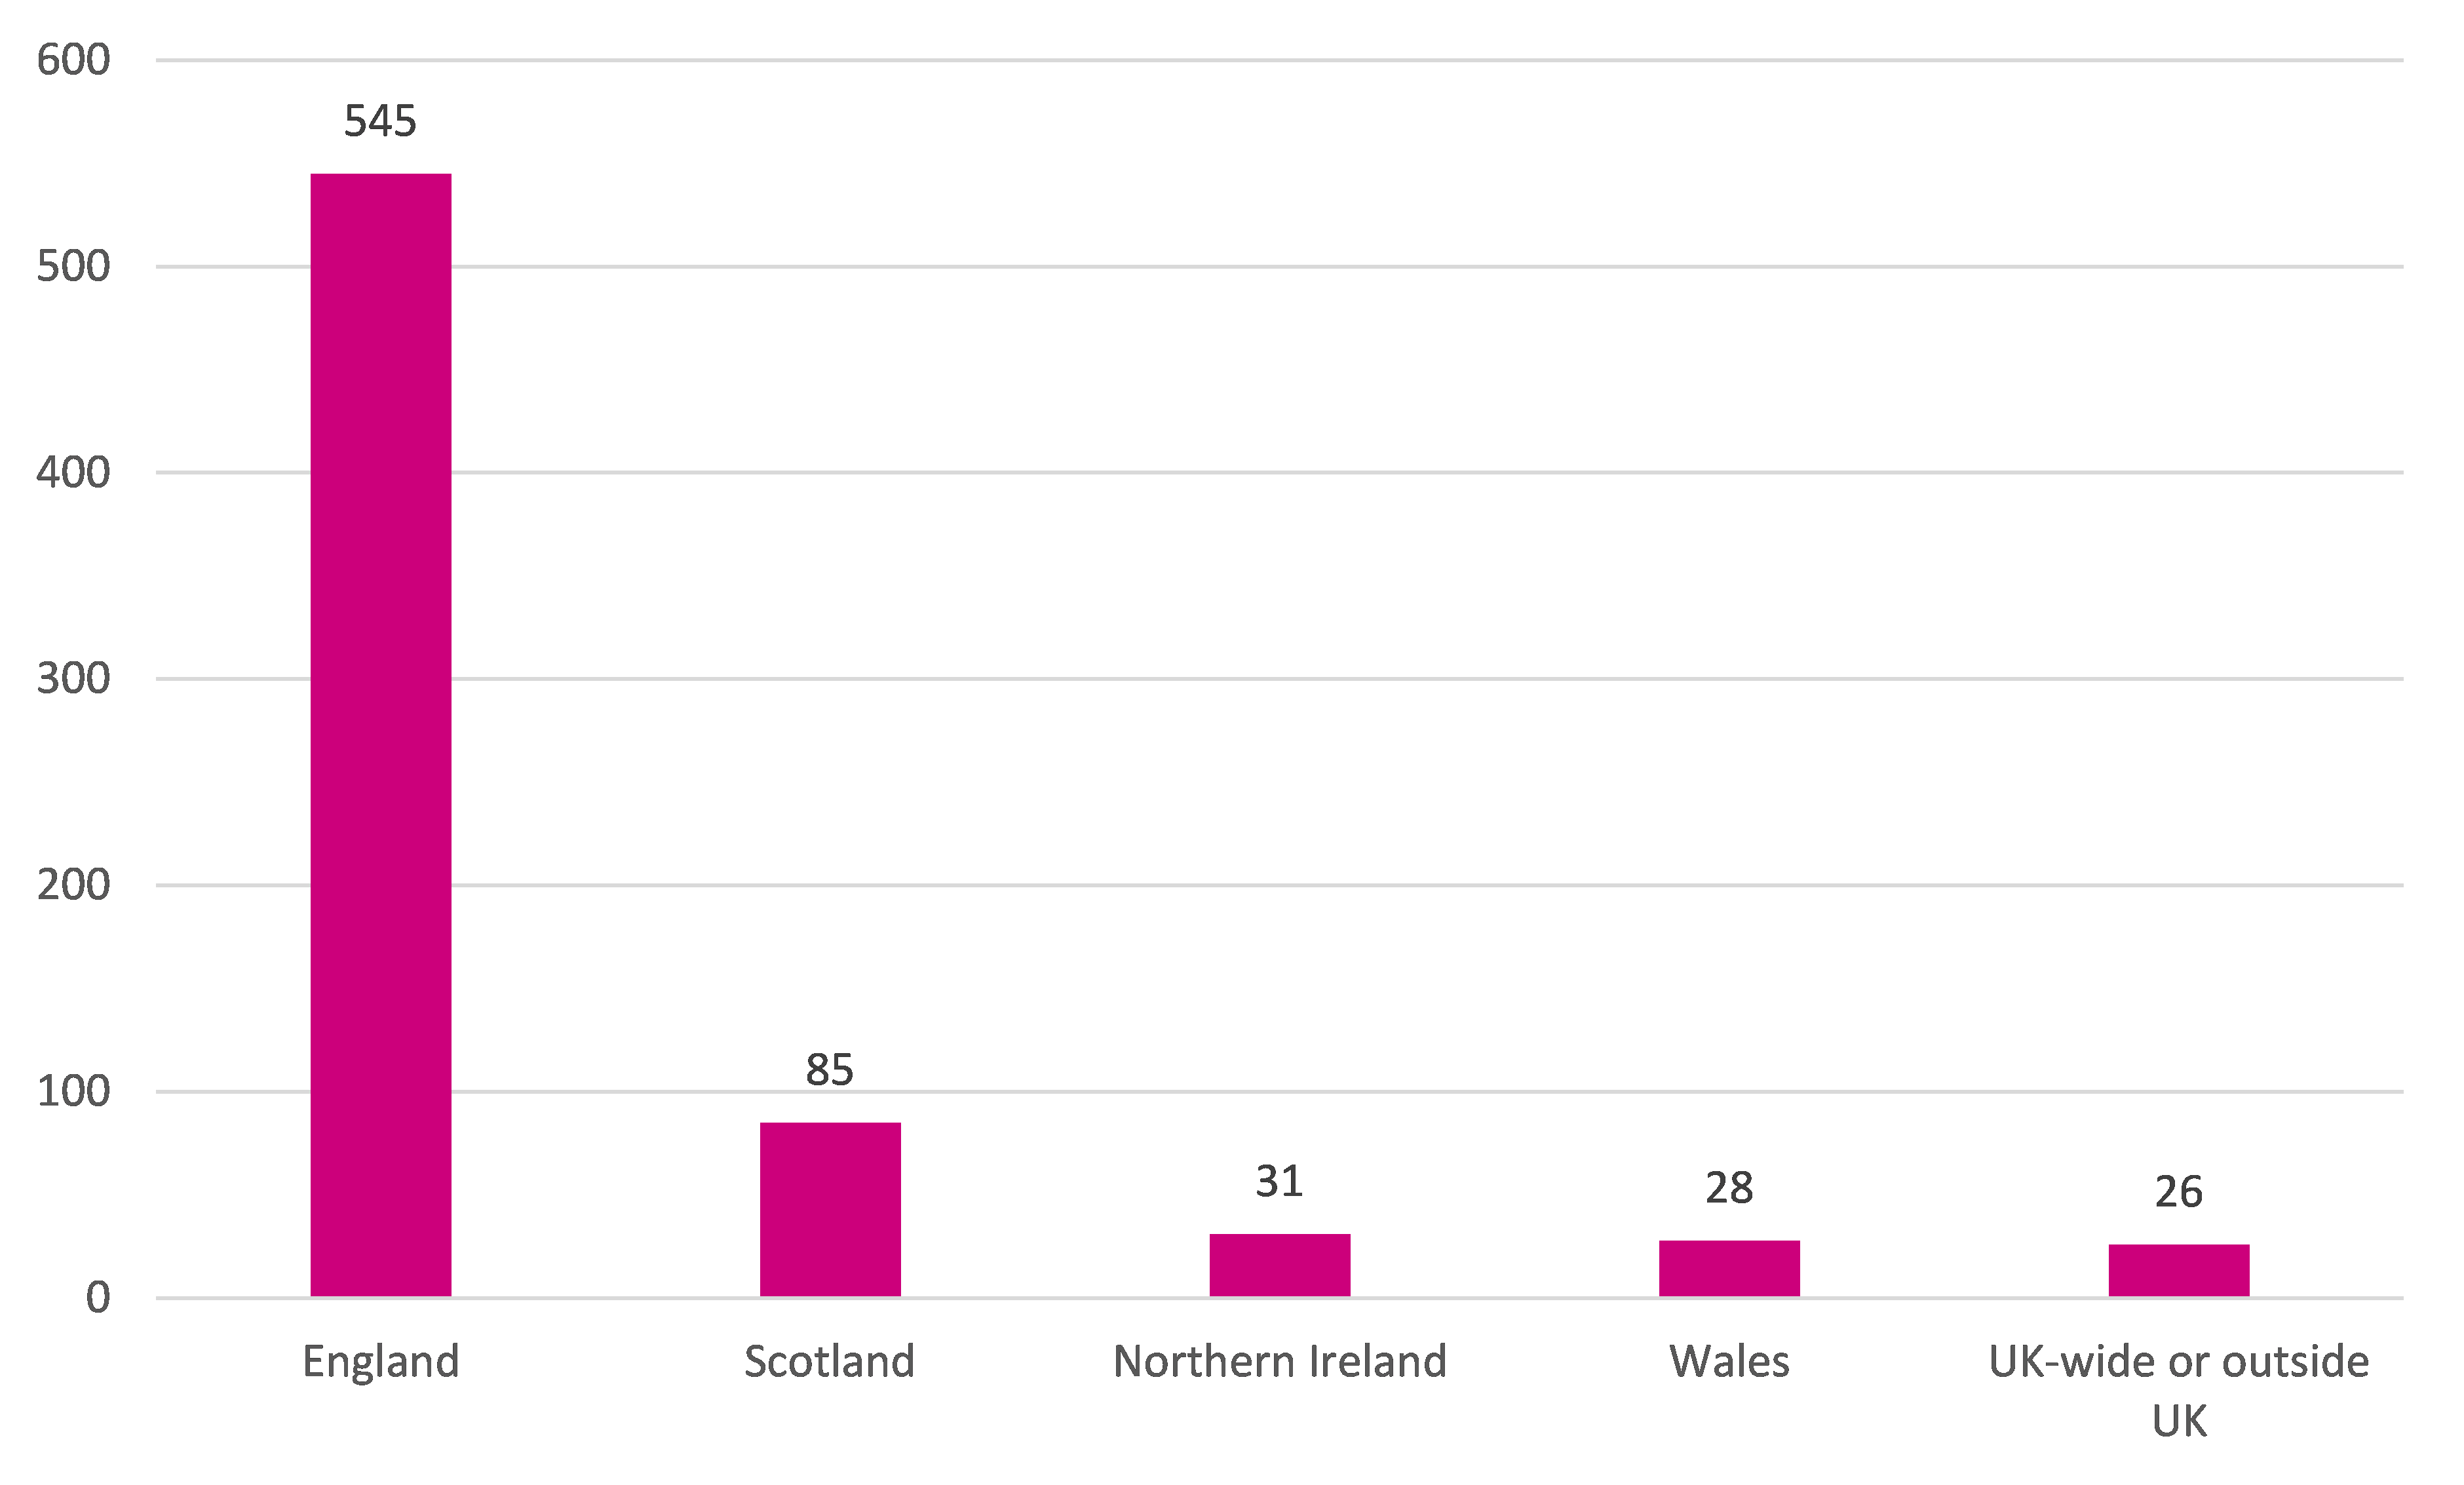 Graph showing the number of current PFI projects in each UK nation.